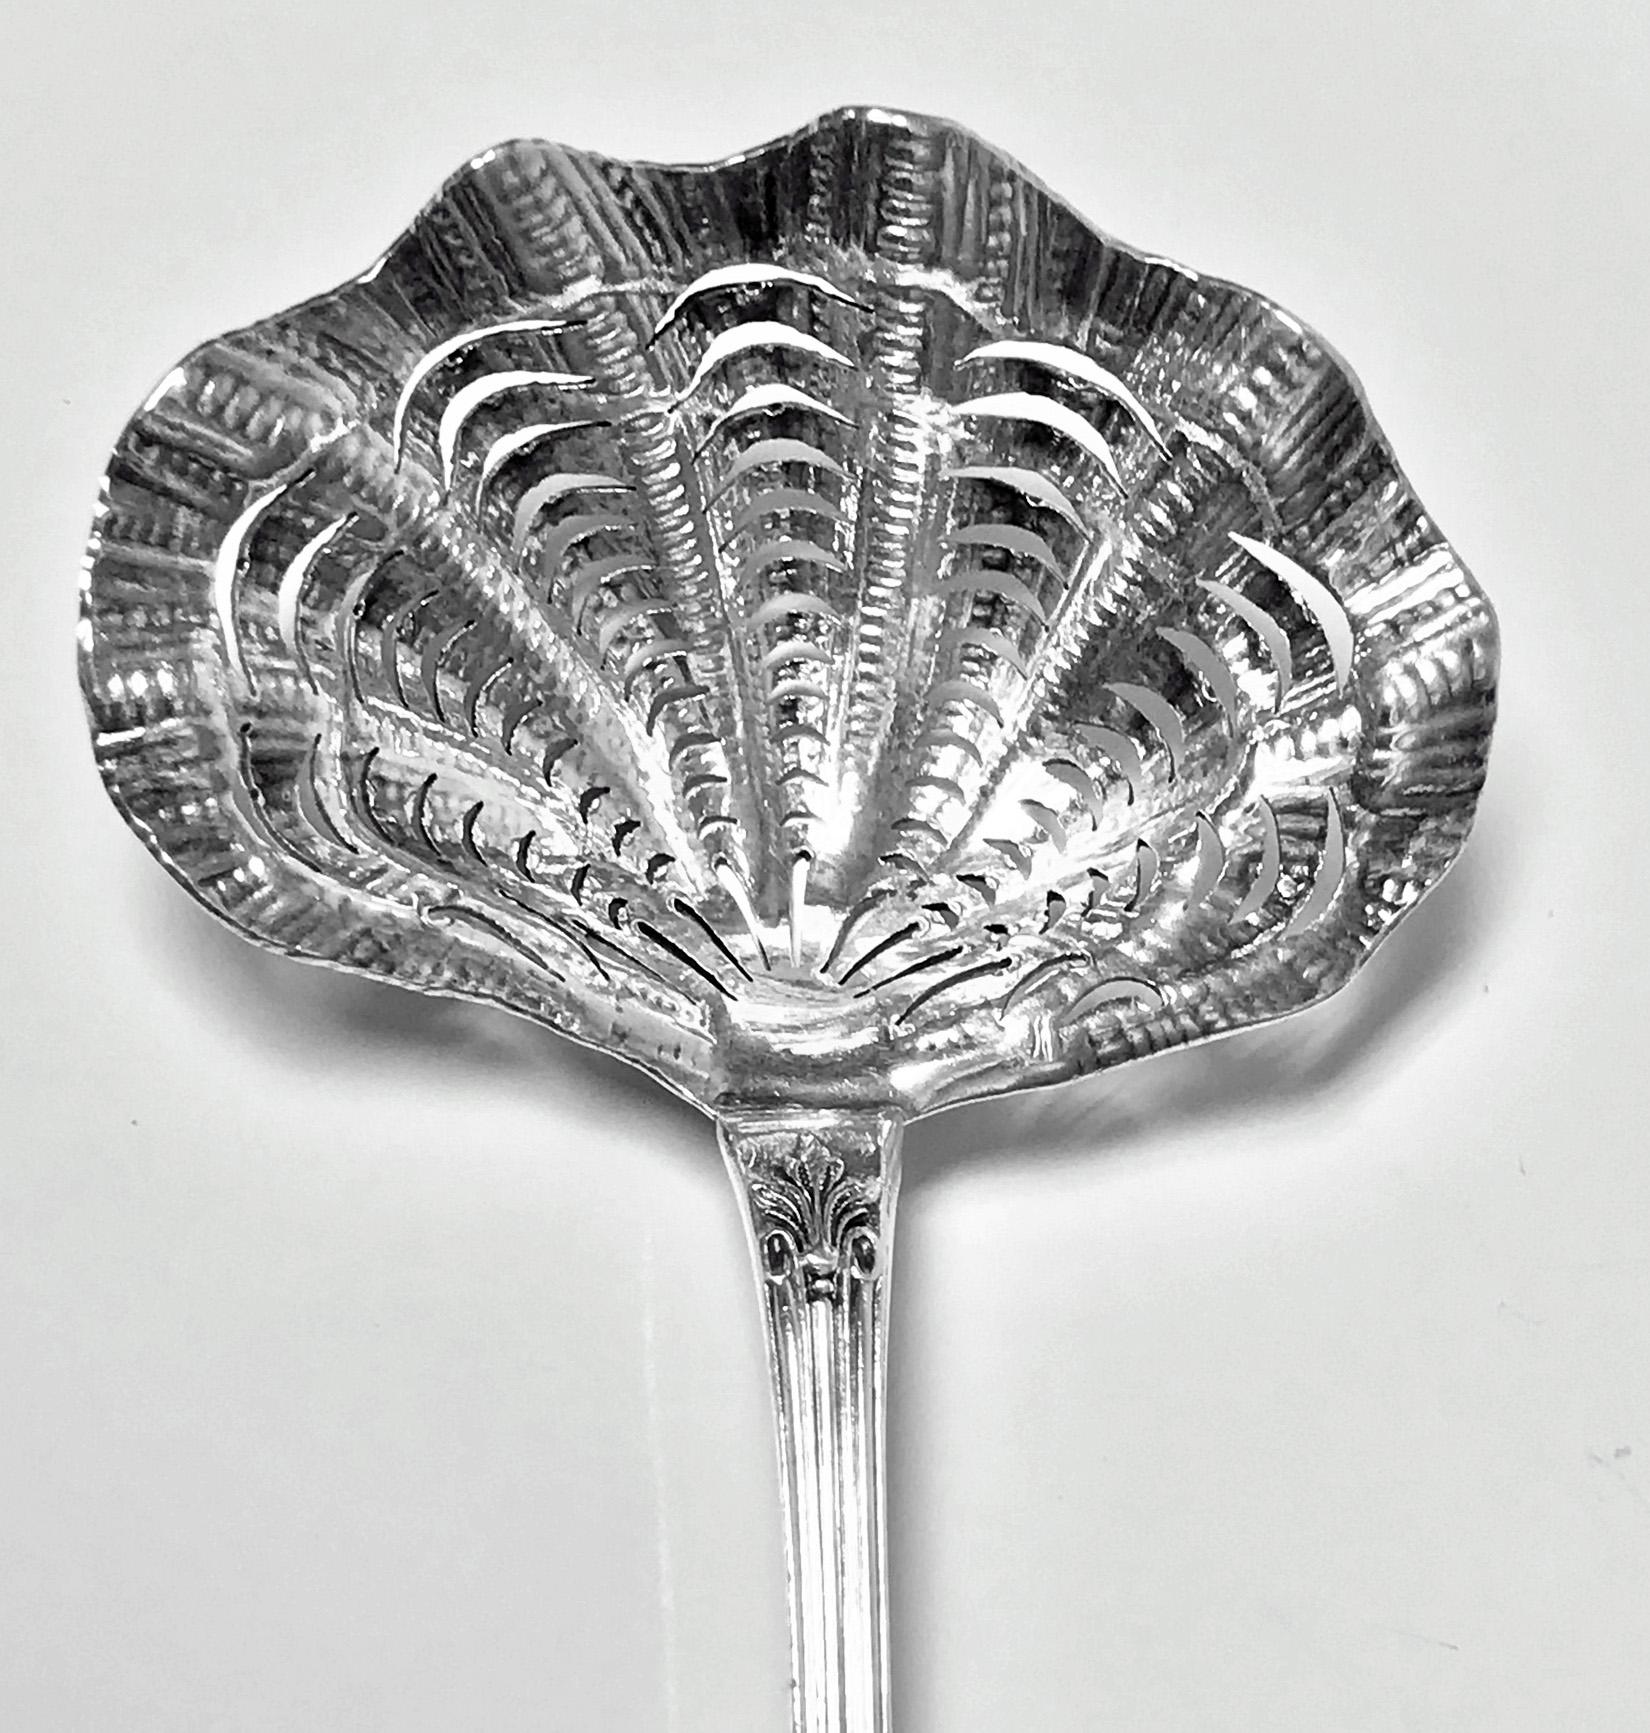 French Silver Sifter ladle, probably Pierre Queille 1834-1846. French Silver Minerva 1st standard (950 std) mark and what appears to be PQ between a spade in lozenge. Wonderful scale pierced textured scalloped shell bowl, tapered thread and rosette